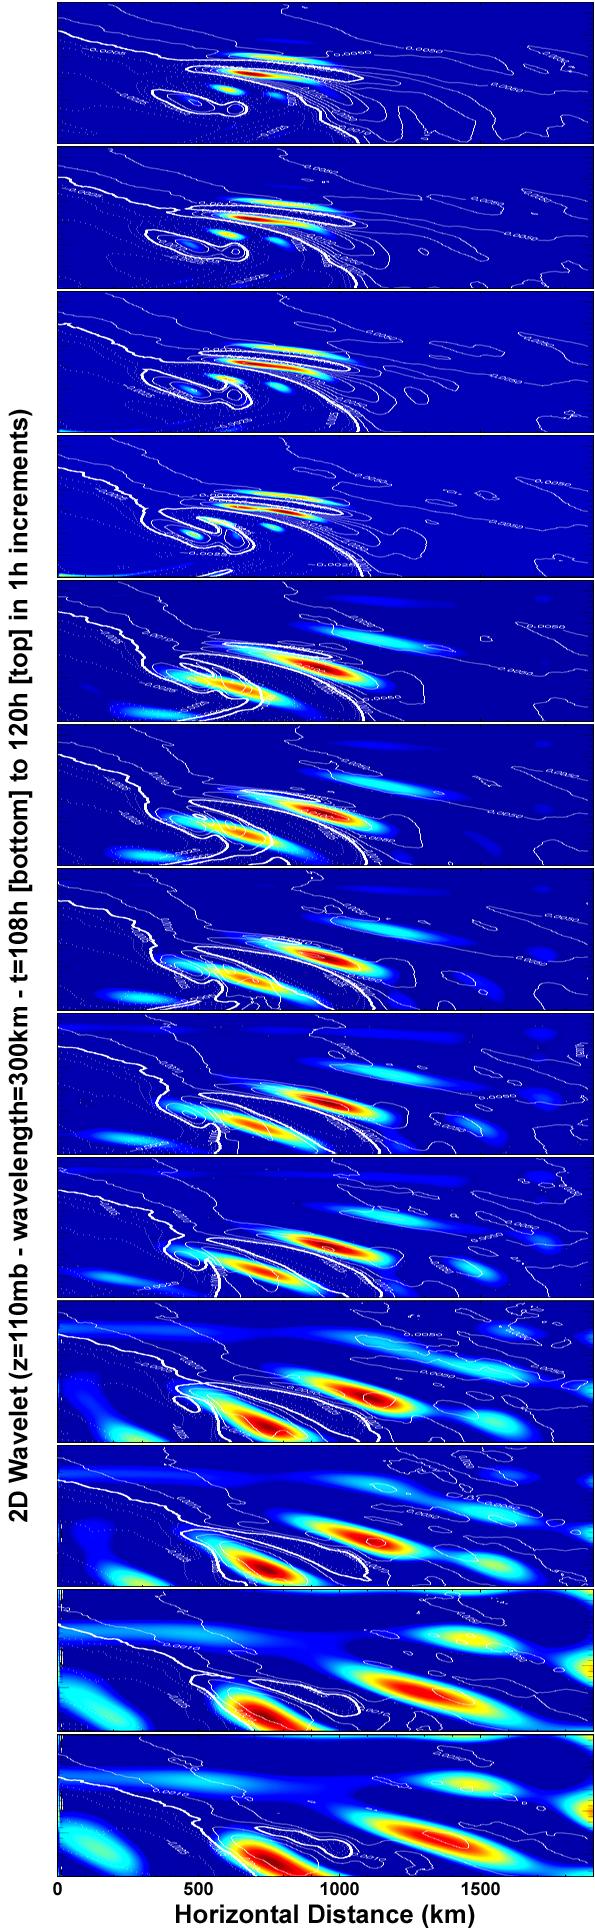 References Dudhia, J., 1993: A nonhydrostatic version of the Penn State/NCAR mesoscale model: Validation tests and simulation of an Atlantic cyclone and cold front. Mon. Wea. Rev., 121, 1493 1513.